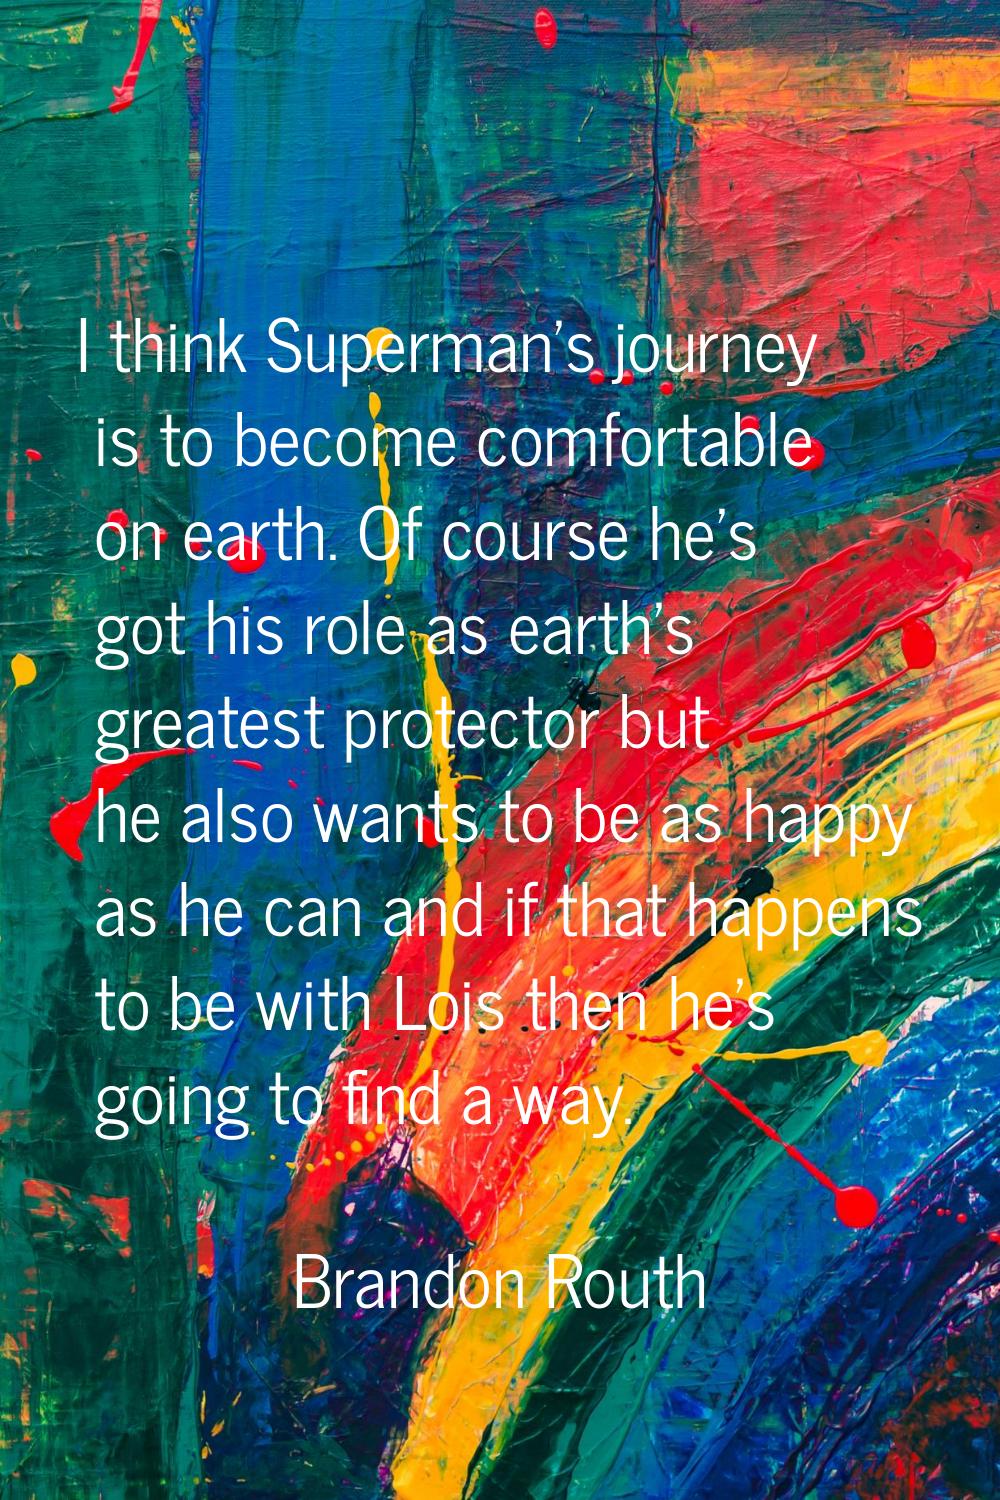 I think Superman's journey is to become comfortable on earth. Of course he's got his role as earth'